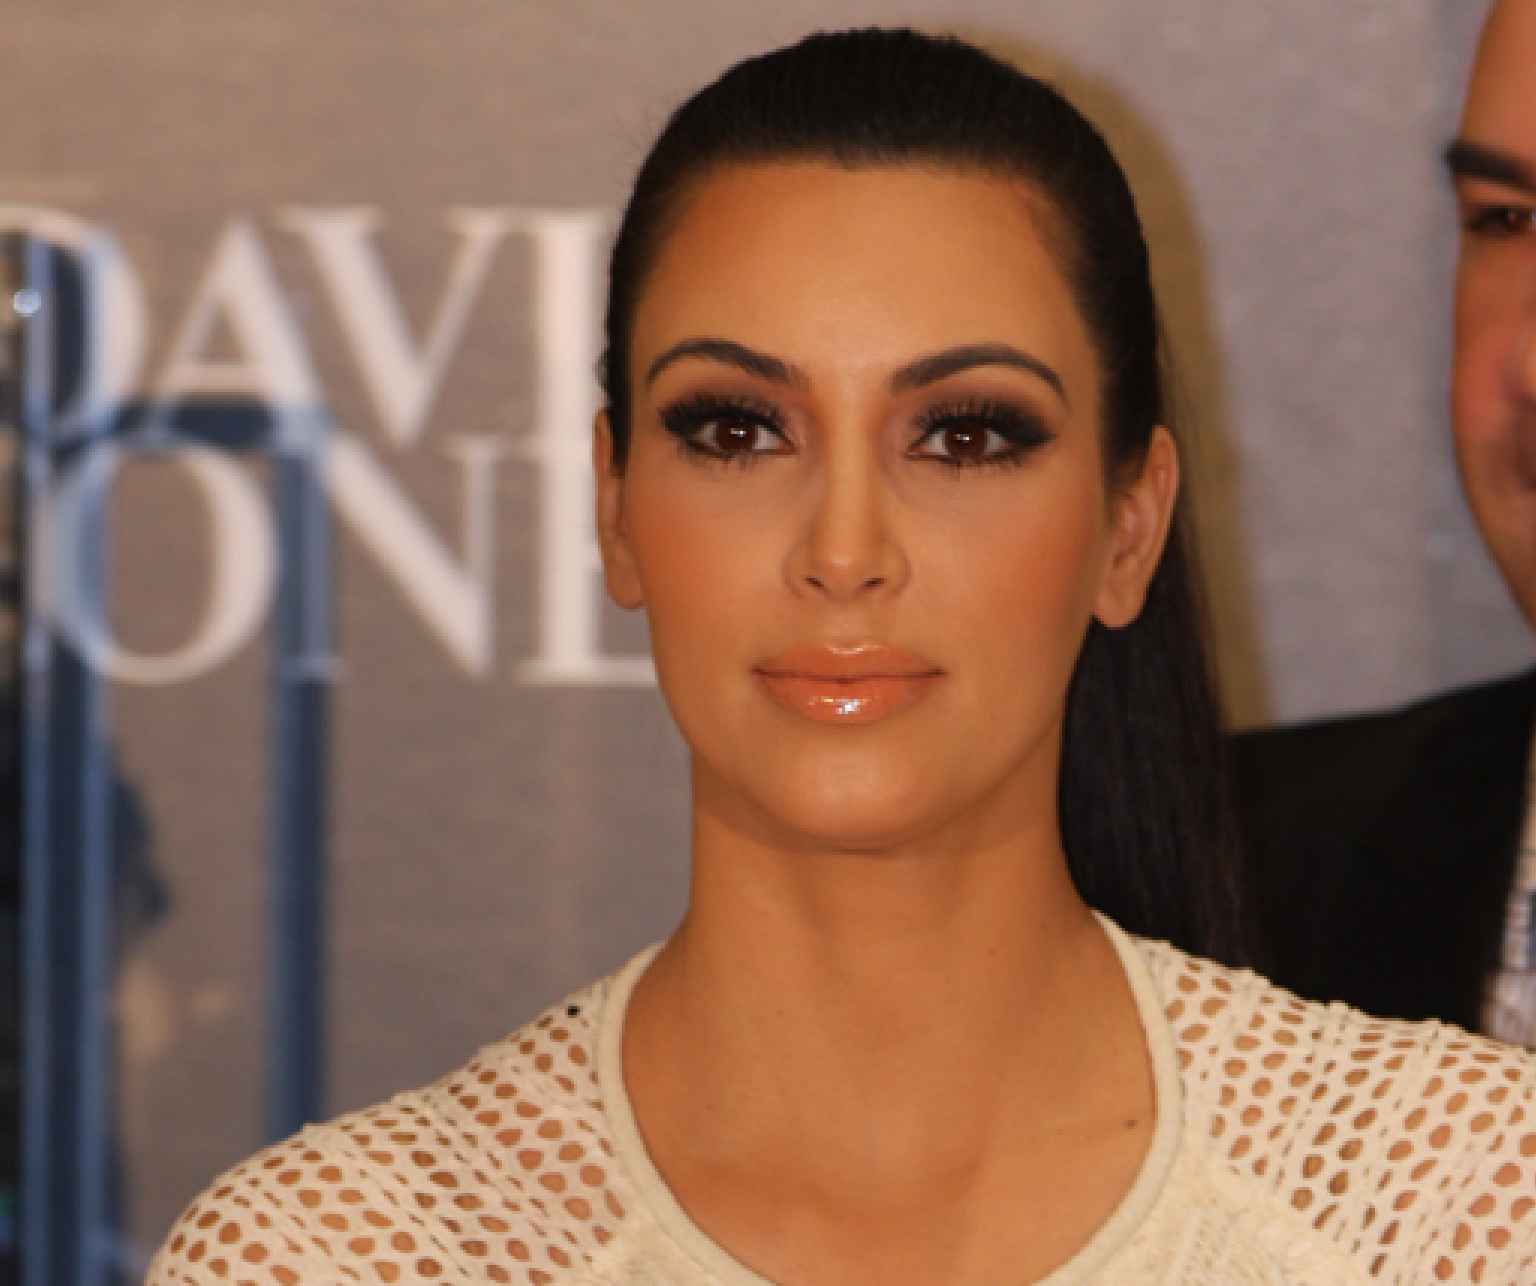 Kim Kardashian says she doesn't have a bad side, so it doesn't matter which side of her face photographers snap.